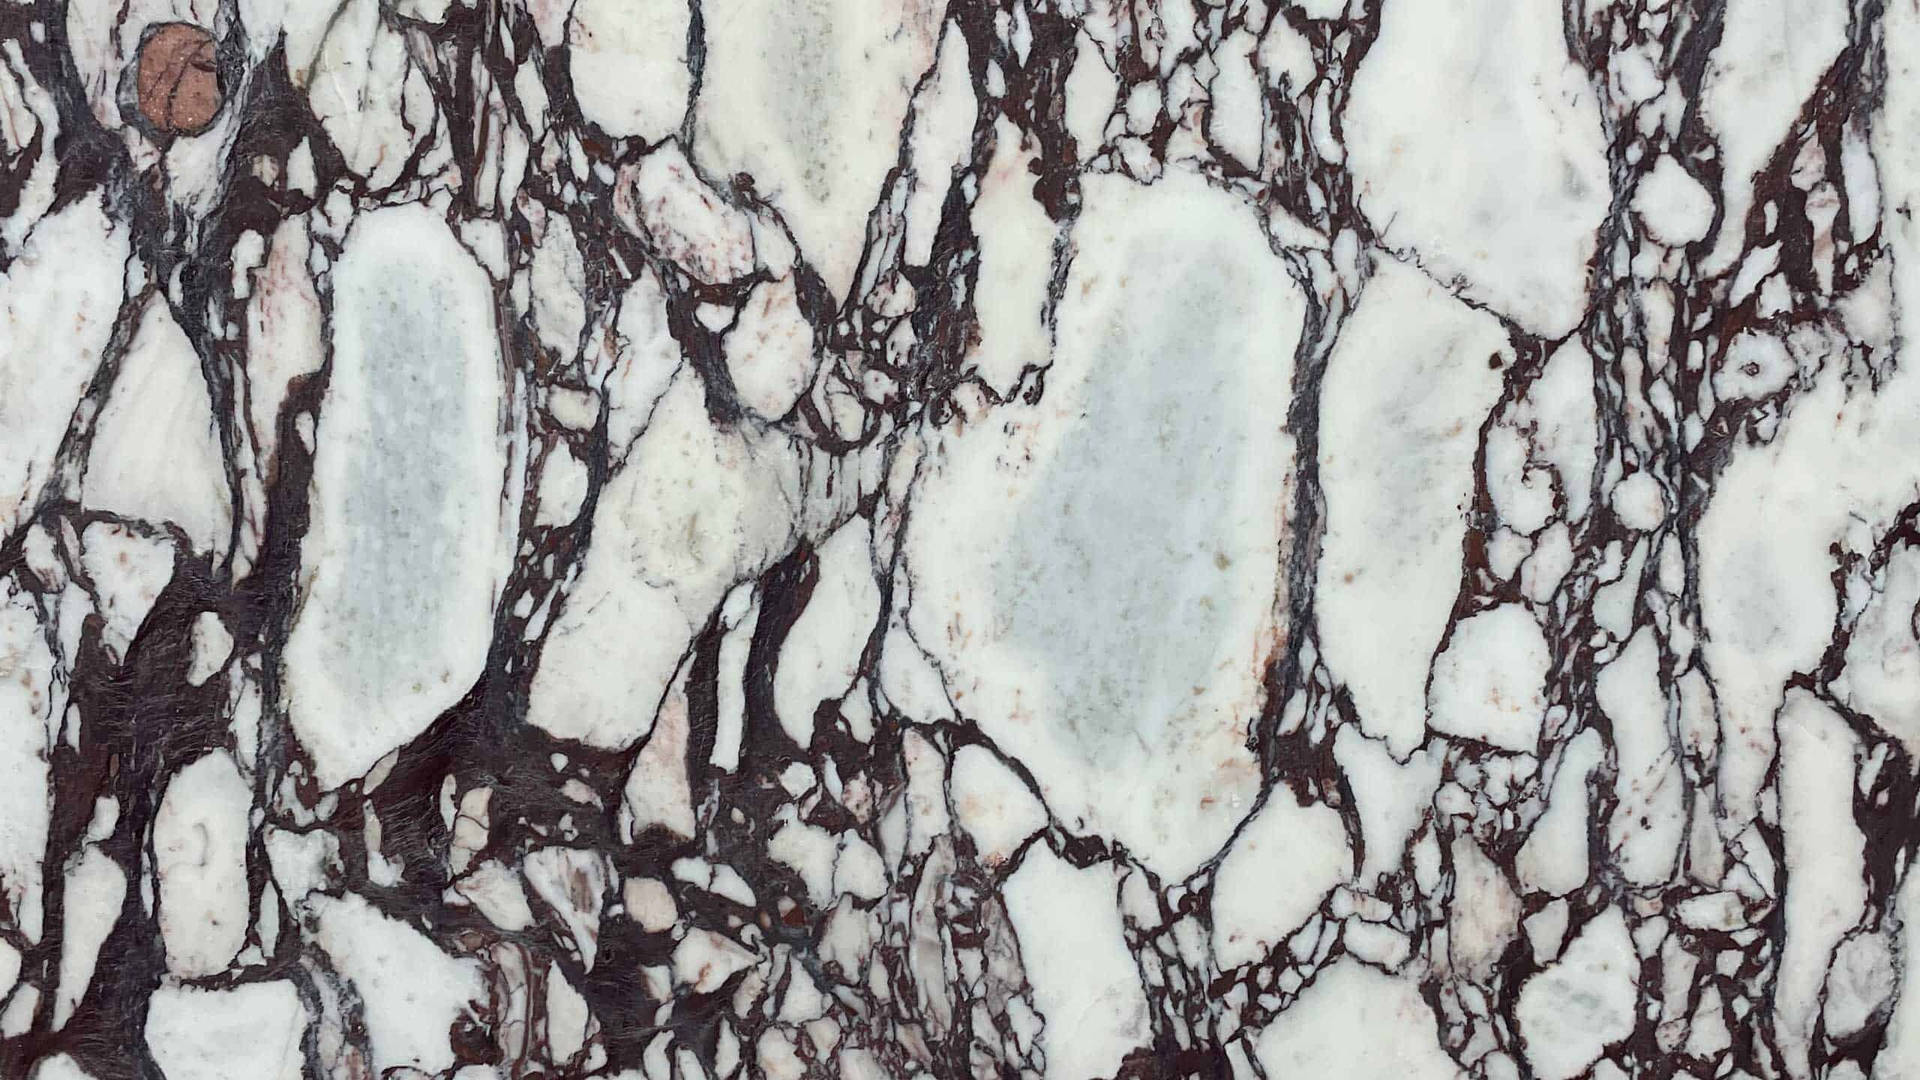 pure white marble texture